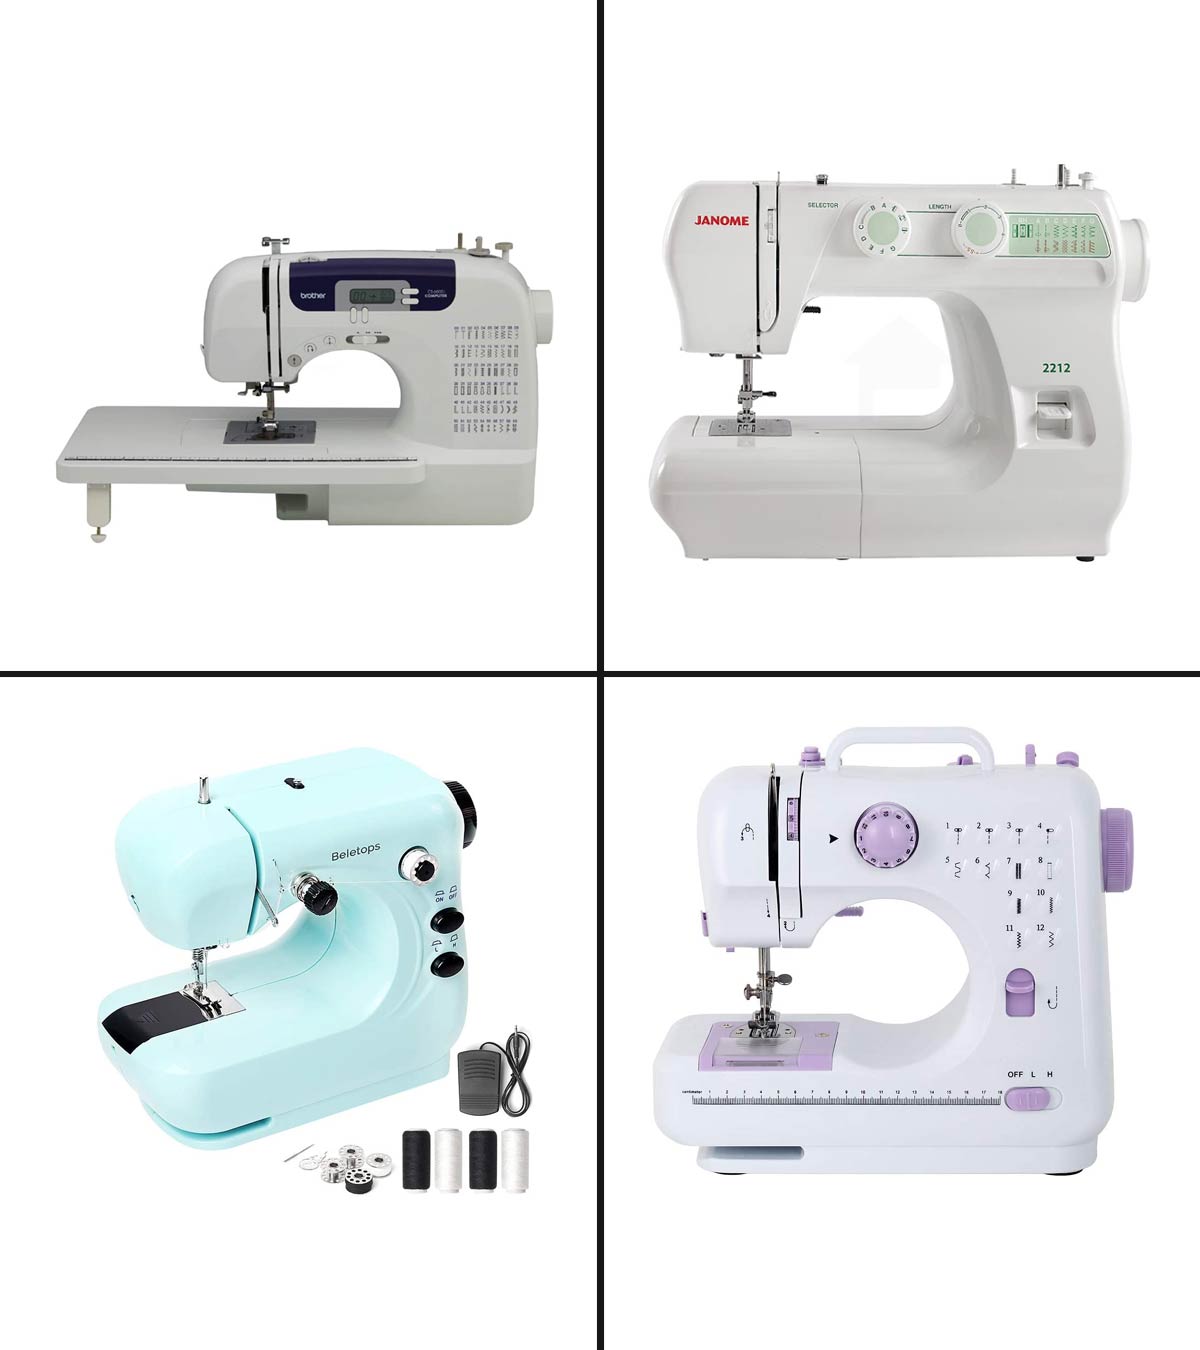 Handheld Sewing Machine Portable Heavy Duty Mini Manual Sewing Machine for Jeans Clothes Fabrics, Cordless Stitching Machine for Beginners, DIY